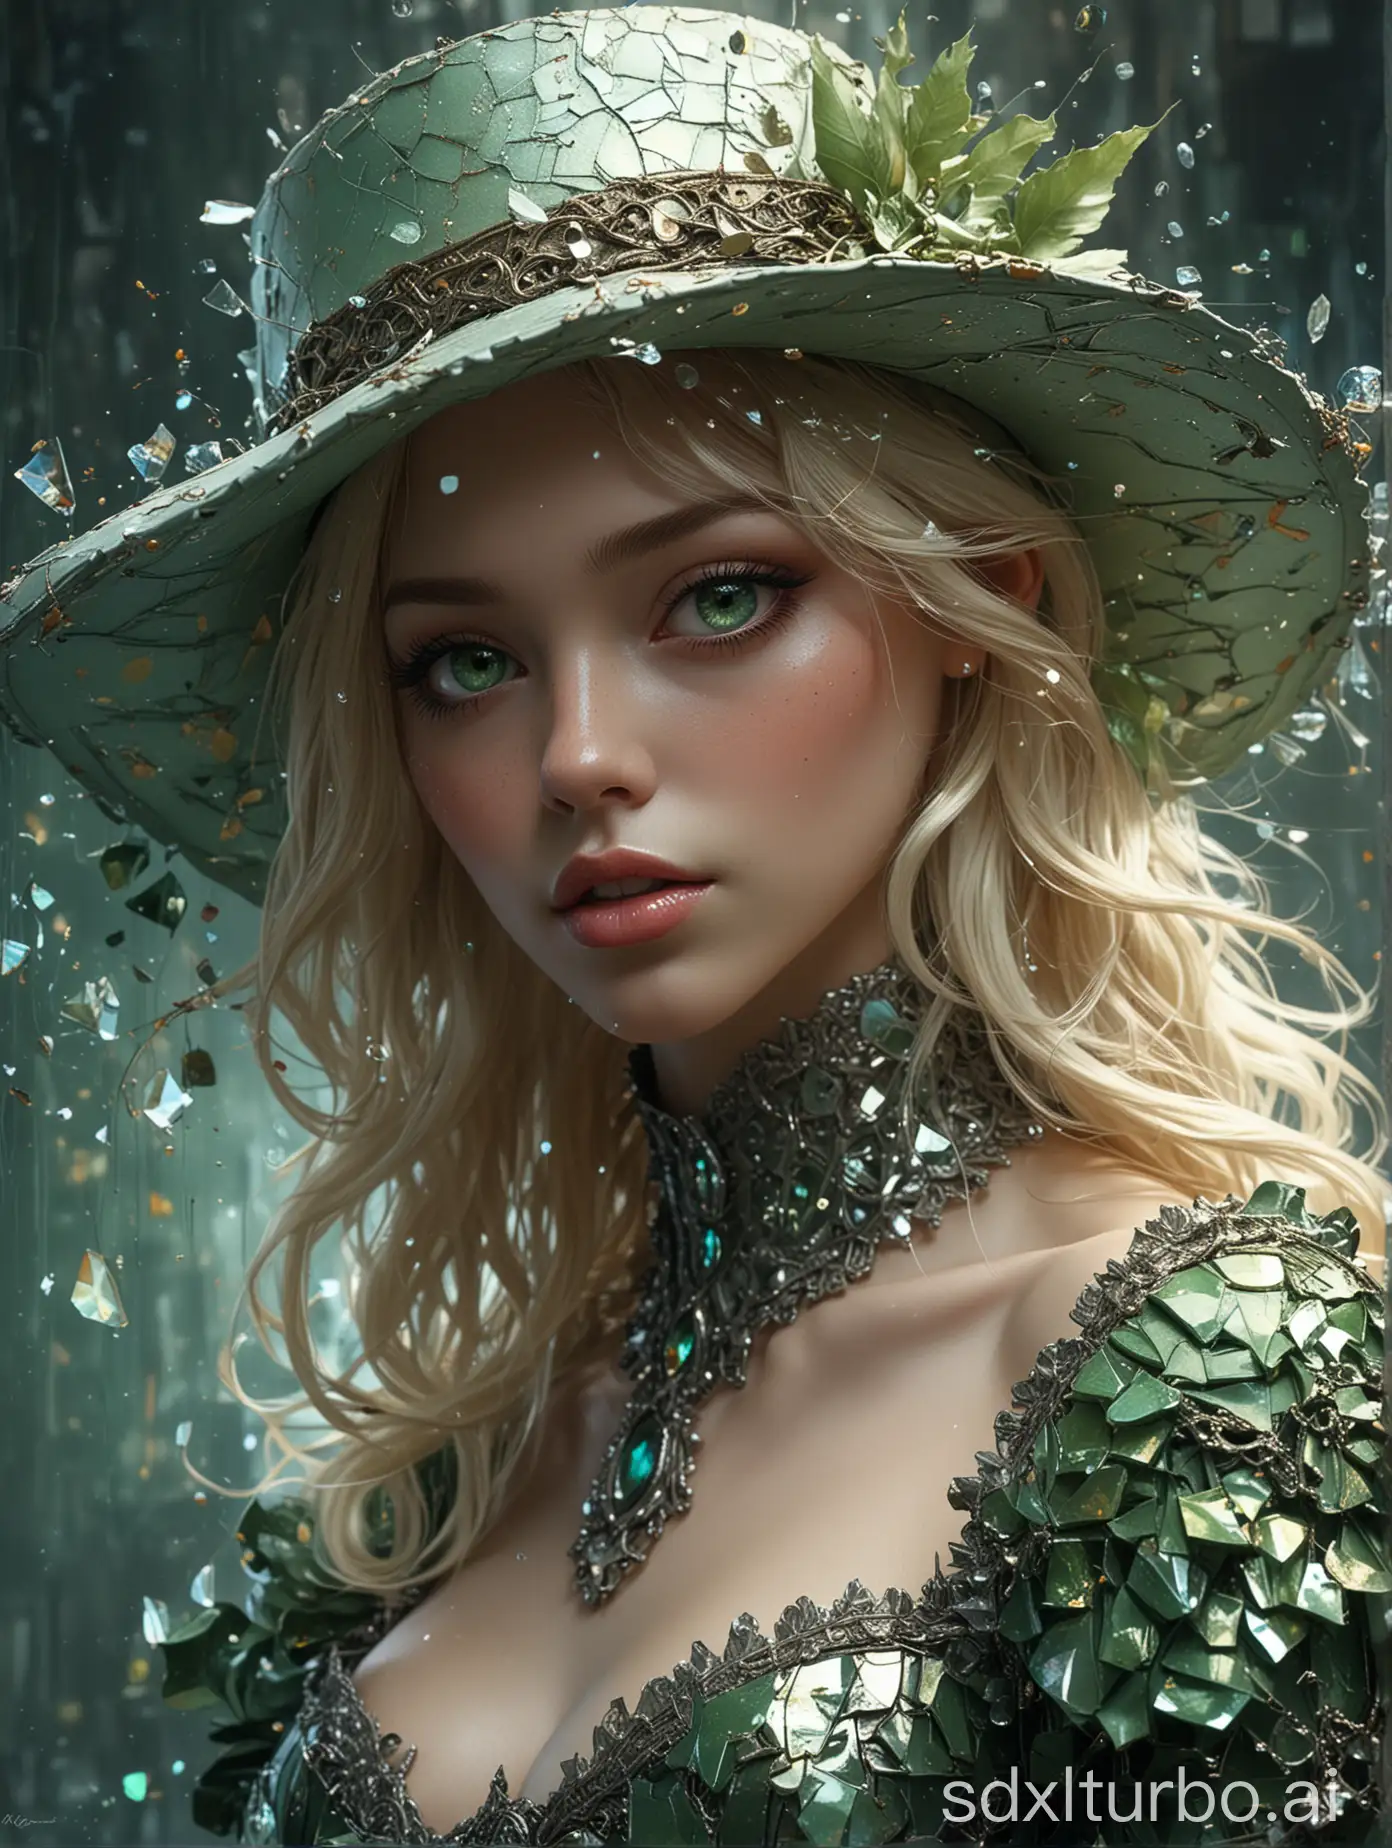 Blonde-Woman-in-Hat-with-Green-Eyes-Surreal-Fantasy-Portrait-by-Cheryl-Griesbach-and-Jasmine-Becket-Griffith